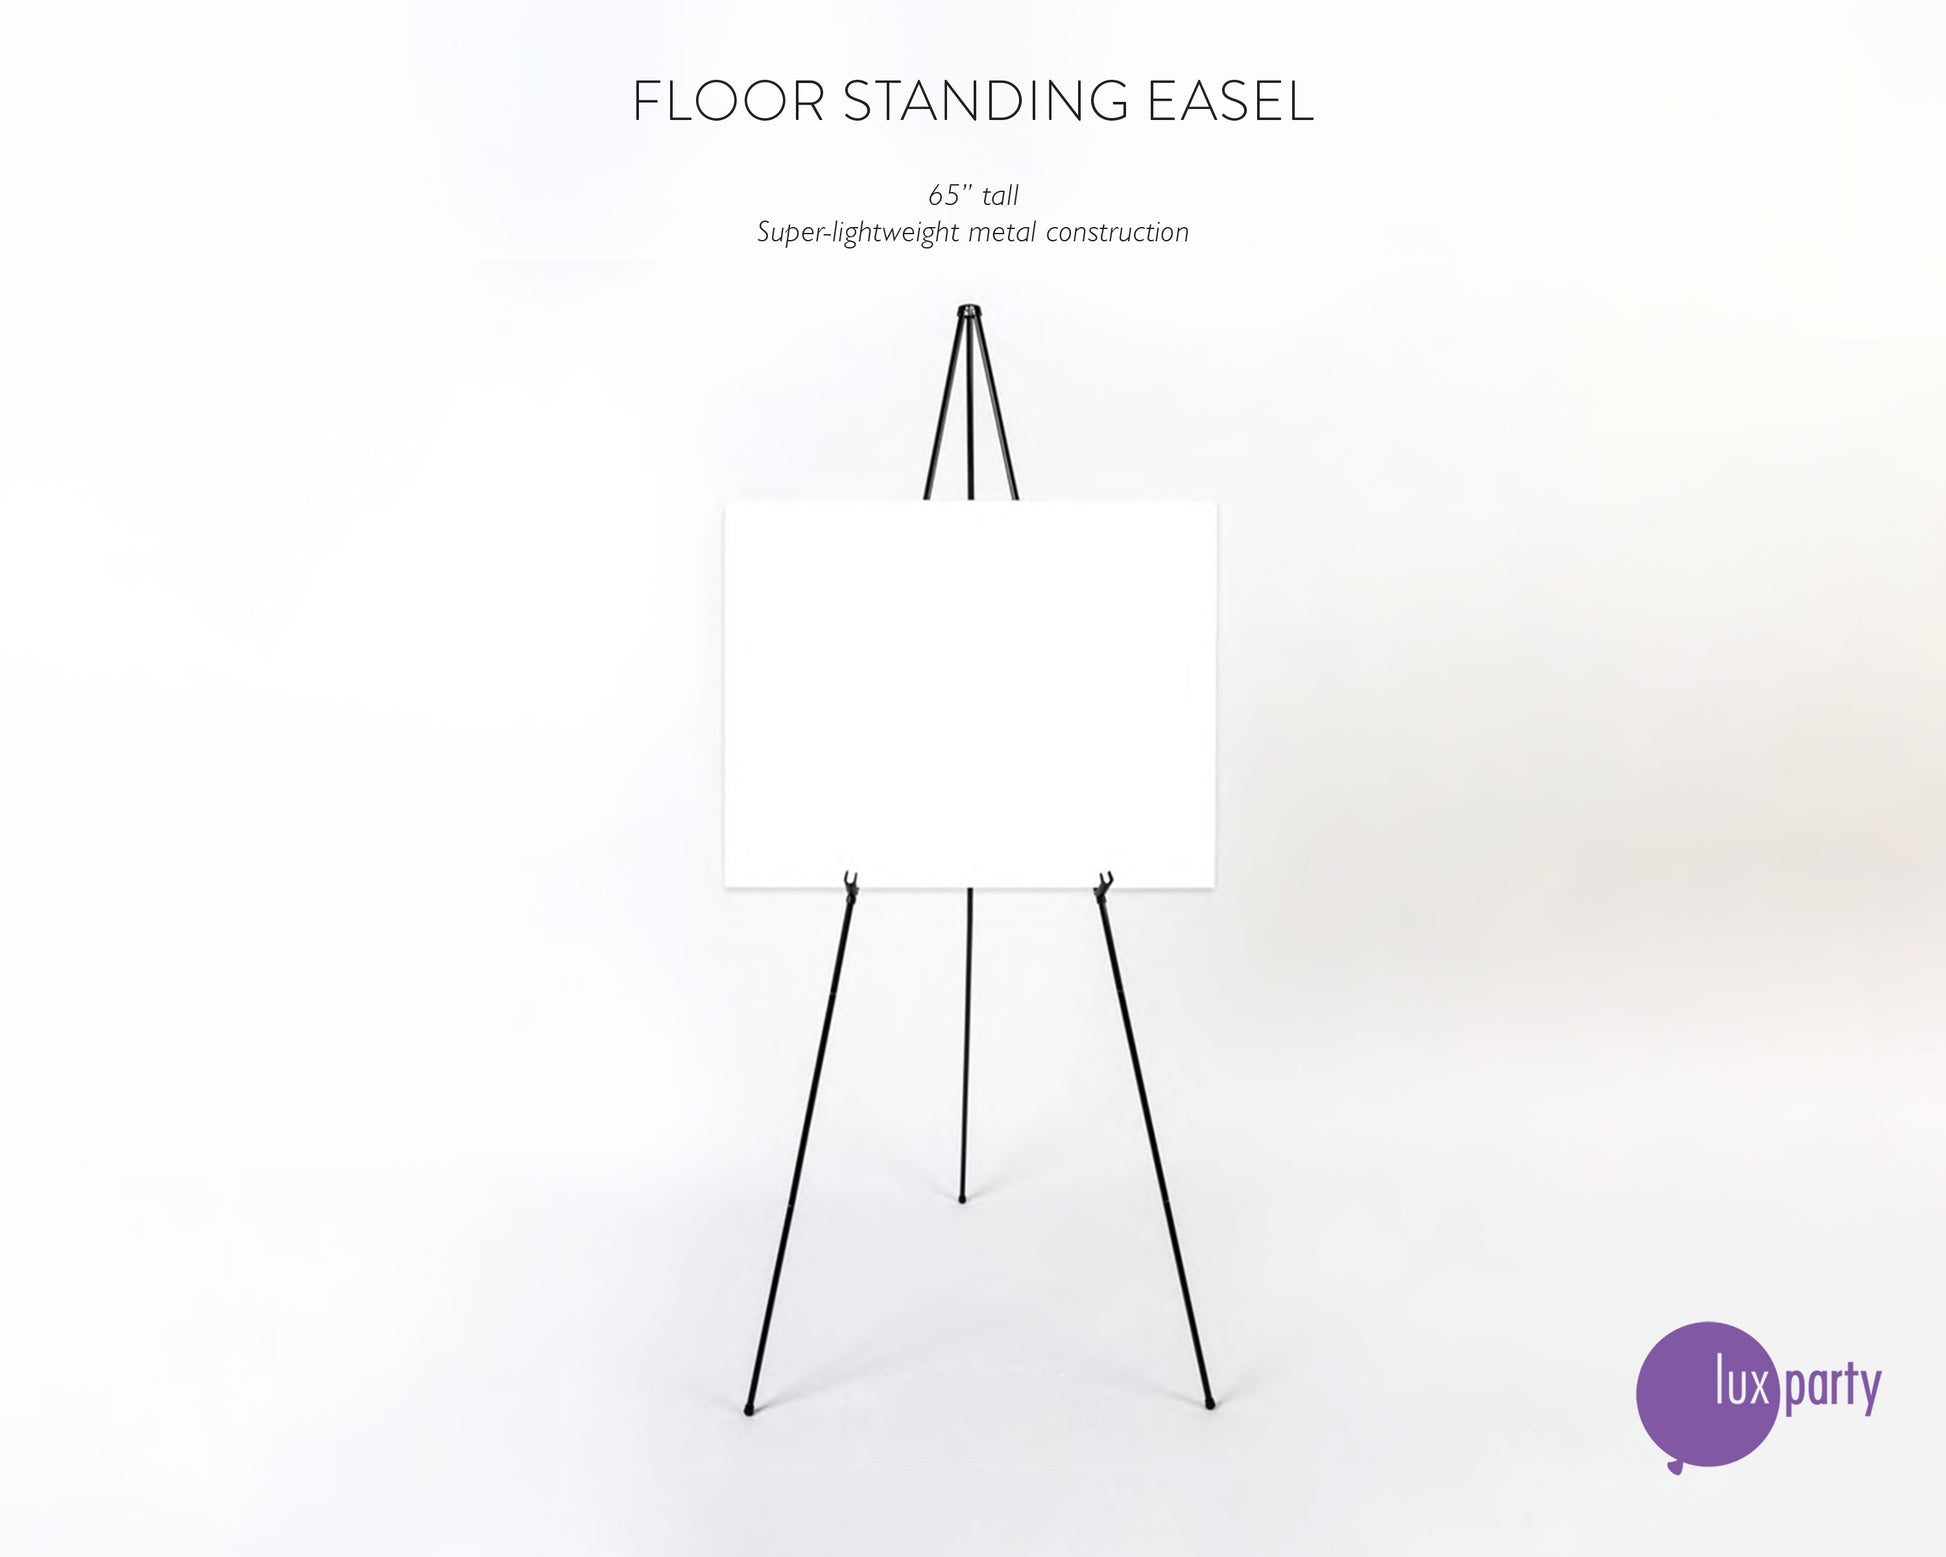 Black lightweight metal floor standing easel, holding a blank white sign, against a white background. Lux Party logo.